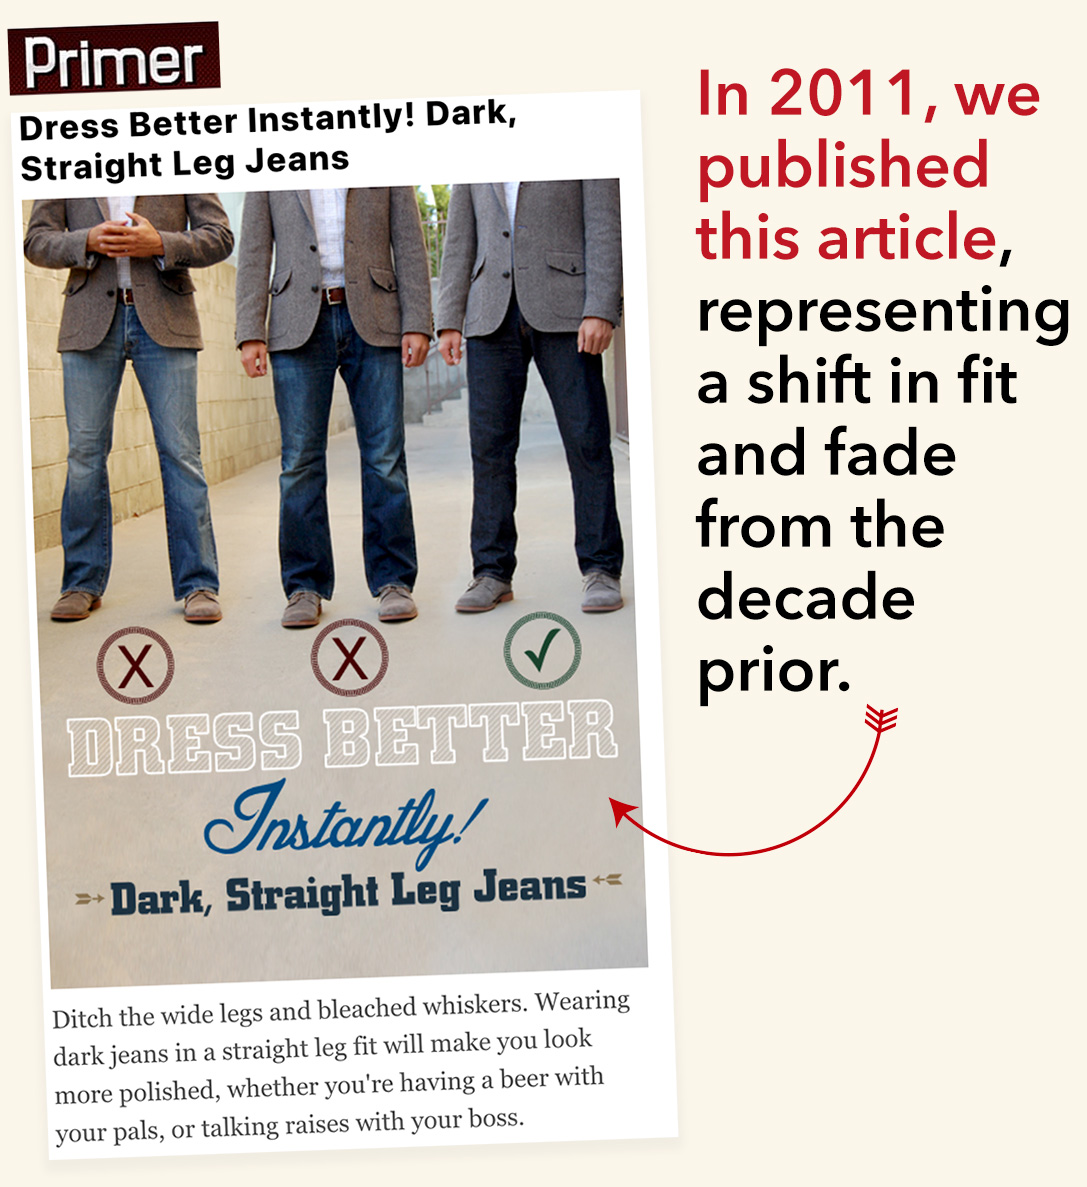 A screenshot from Primer features three men wearing jeans and gray blazers. The first man wears light blue flared jeans with a red "X" below him. The second man wears dark blue bootcut jeans with a brown "X" below him. The third man wears dark blue straight leg jeans with a green checkmark below him. The text above reads "Dress Better Instantly! Dark, Straight Leg Jeans." To the right, red text says, "In 2011, we published this article, representing a shift in fit and fade from the decade prior." Below, there is additional text promoting dark, straight leg jeans for a polished look.